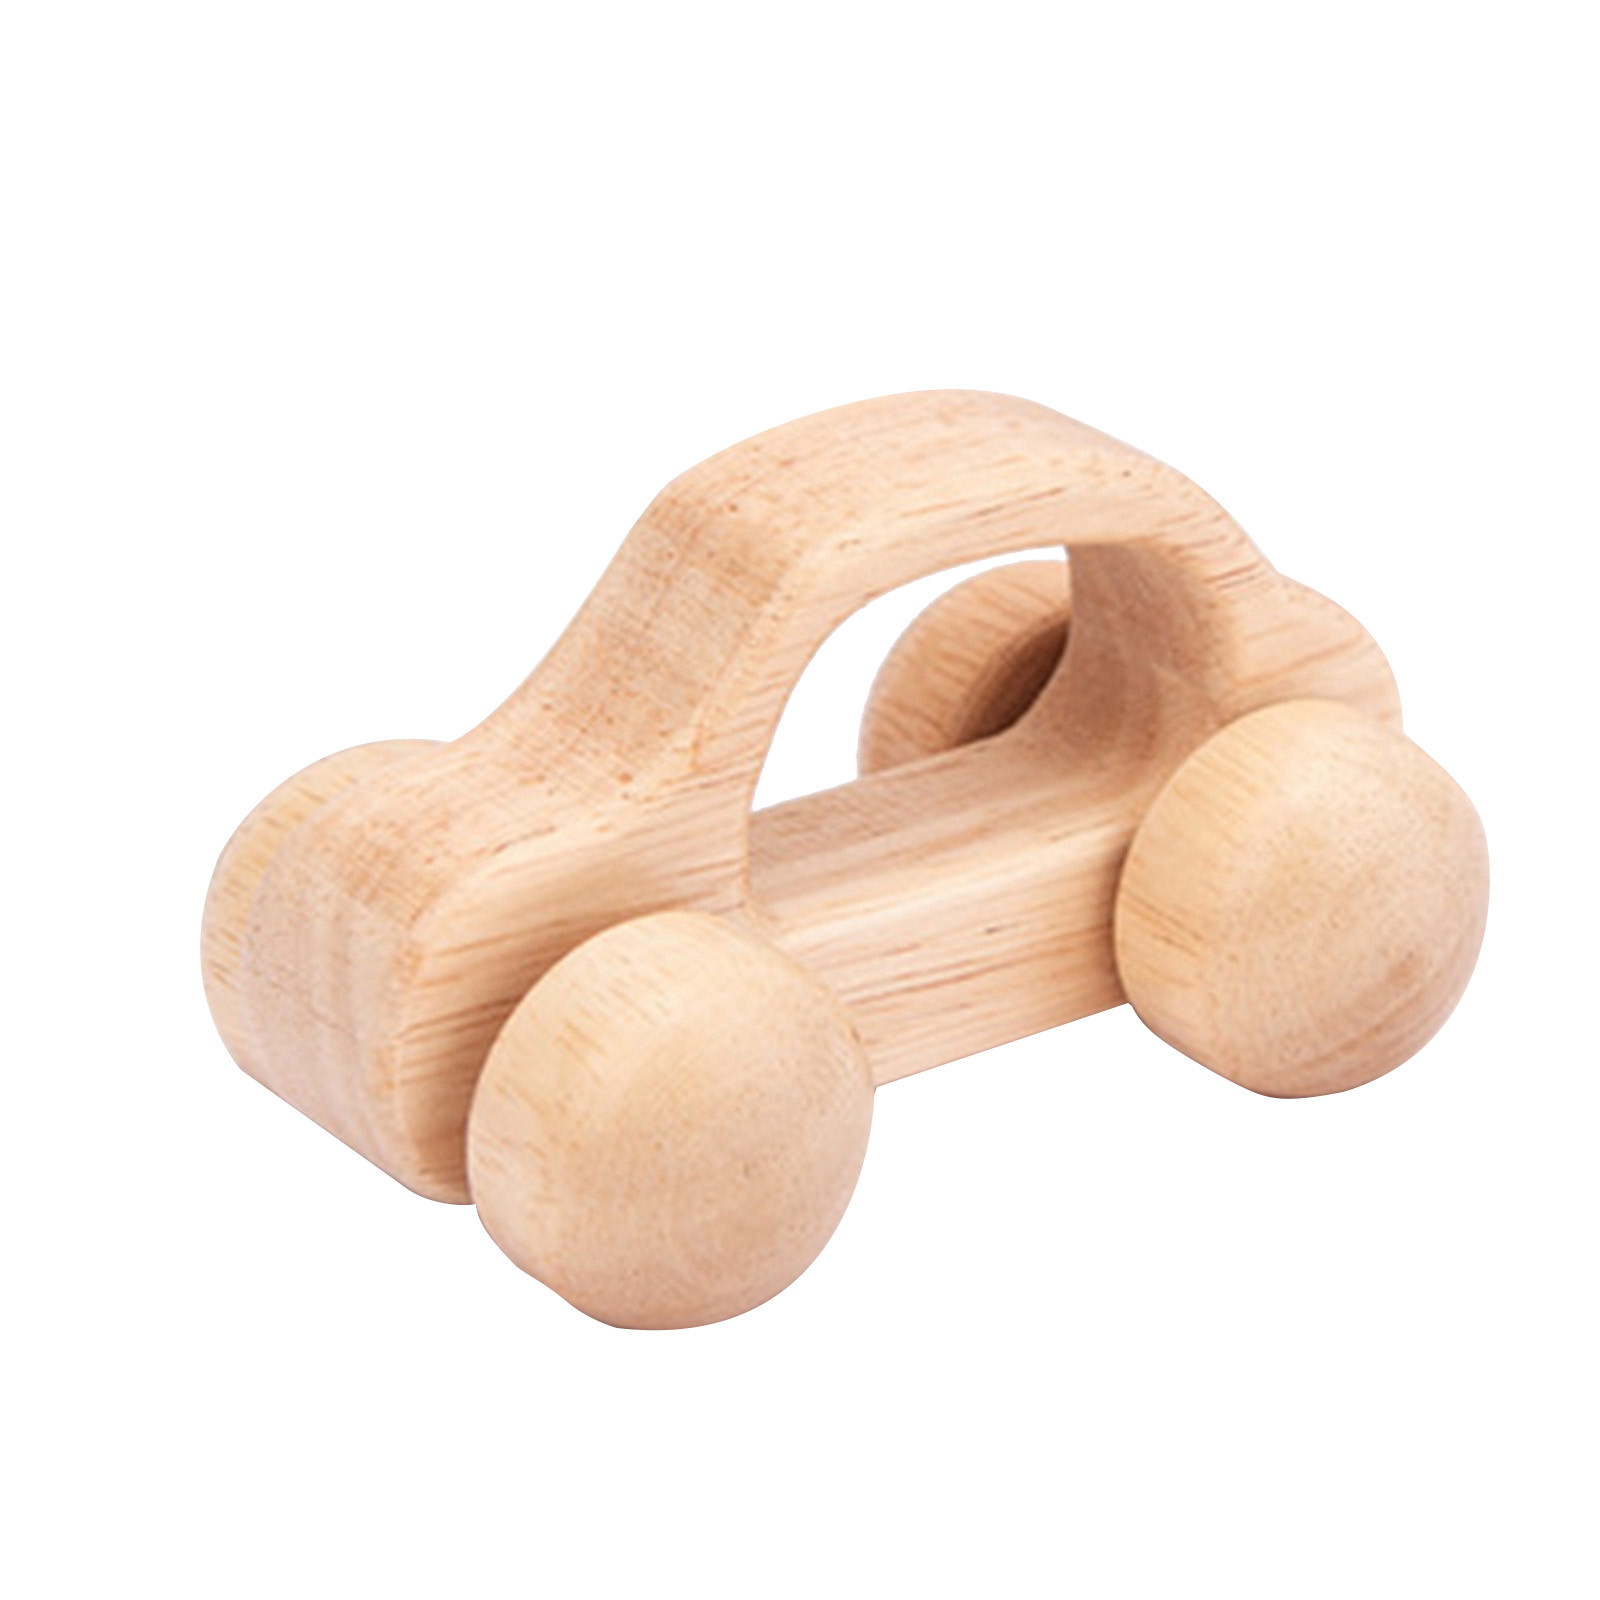 Fridja Let's Make Wooden Car Toys Wood Rattle Toy Cars Handmade Wood Eco  Toy Car